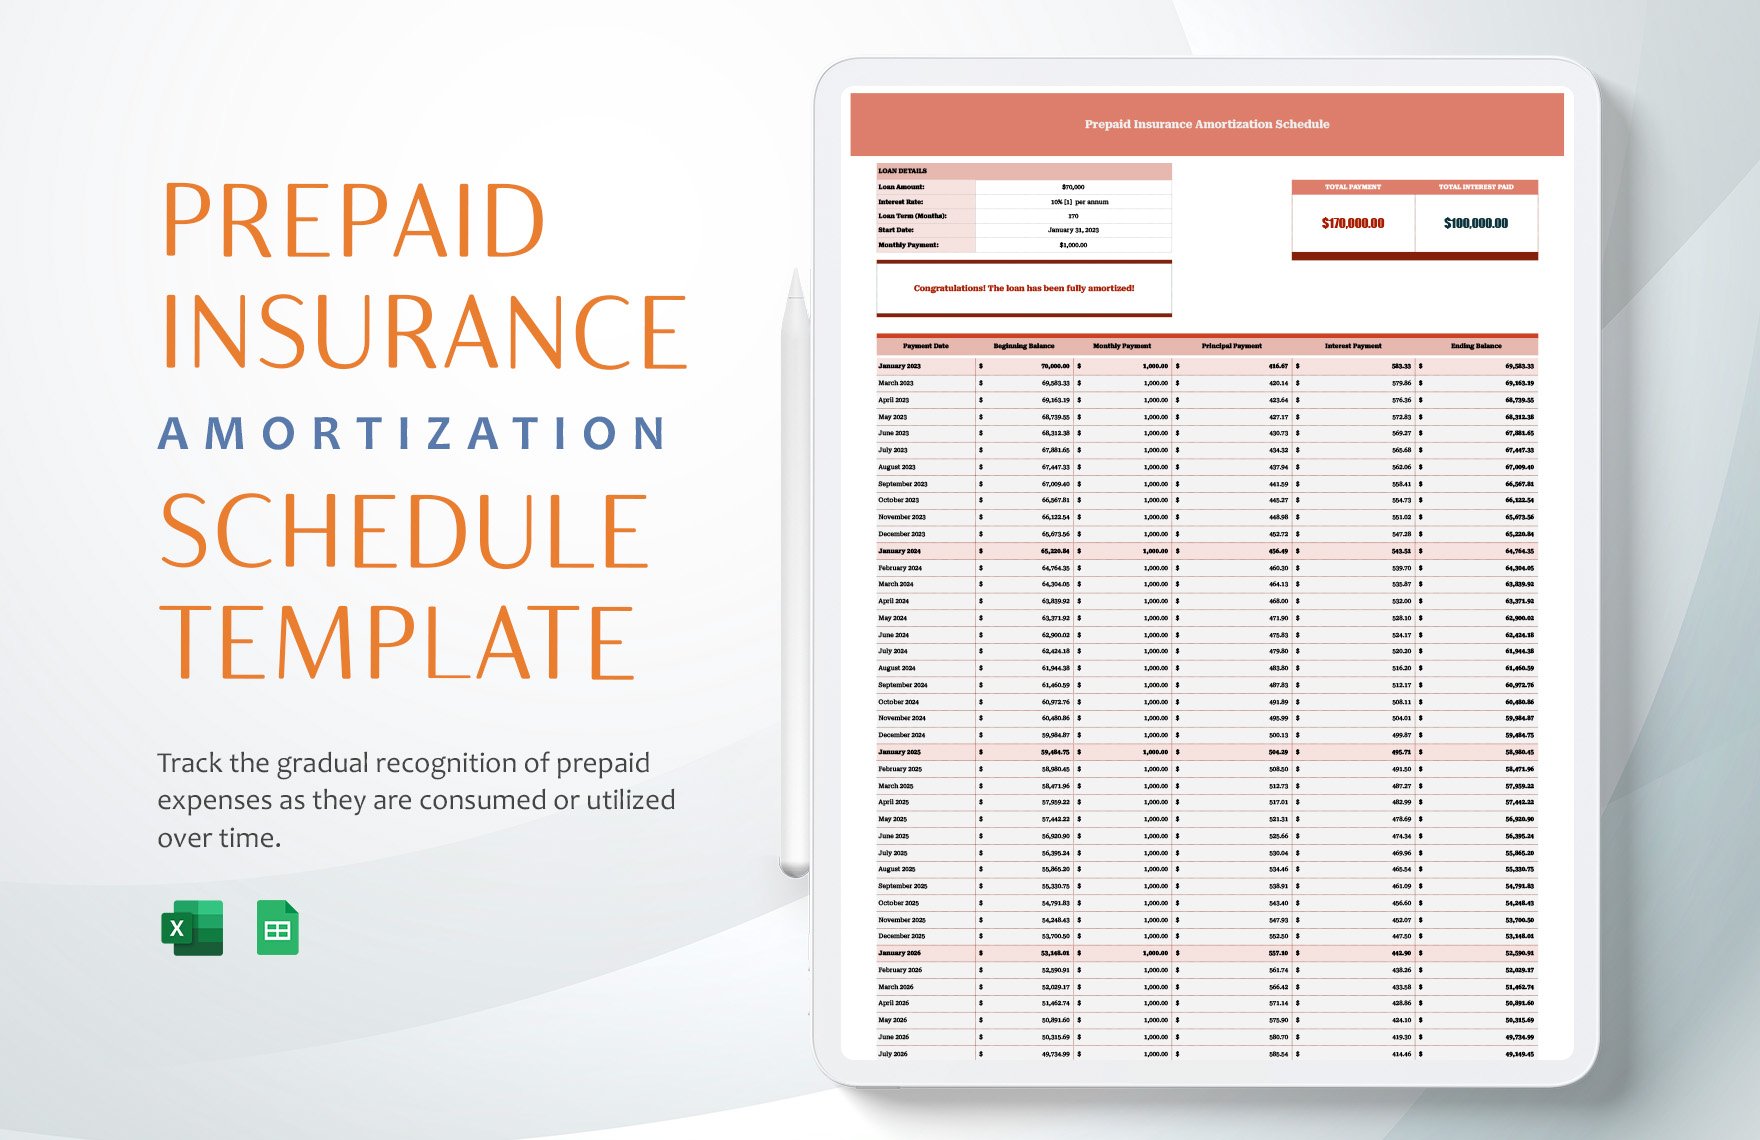 Prepaid Insurance Amortization Schedule Template in Excel, Google Sheets